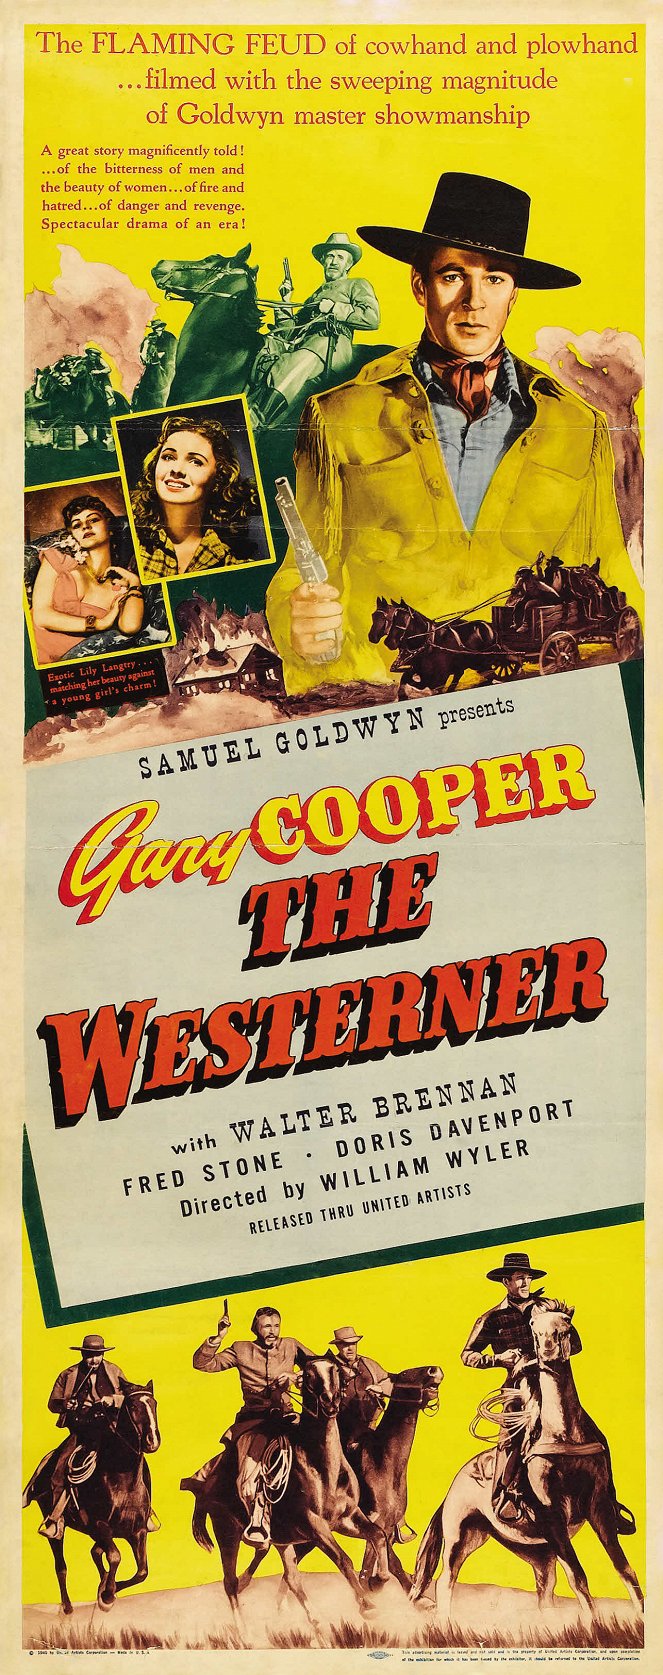 The Westerner - Posters